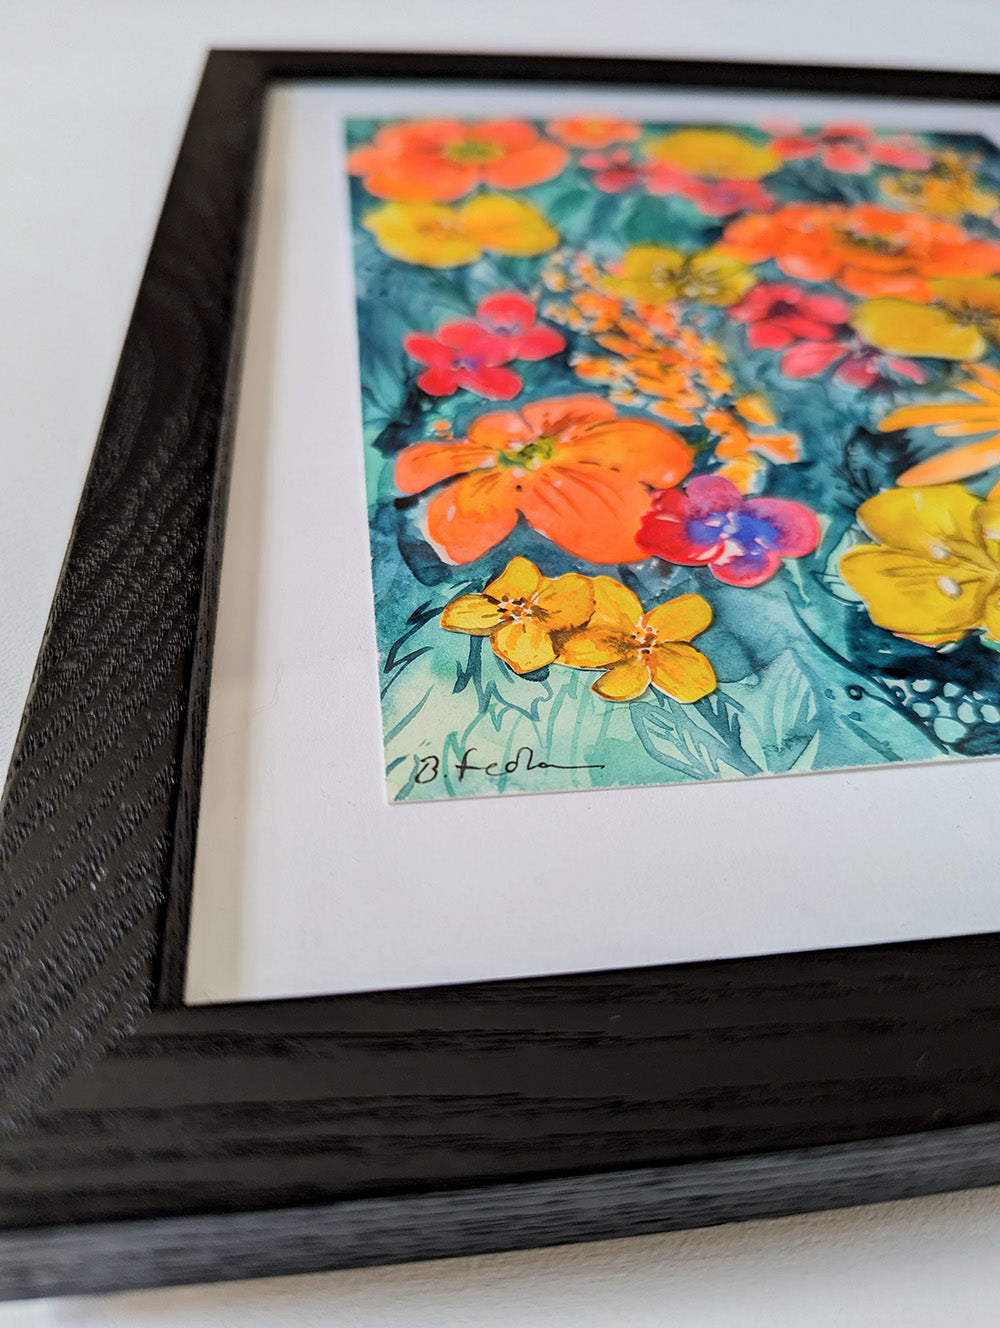 Neon Floral #3 - Original Painting by Briana Feola